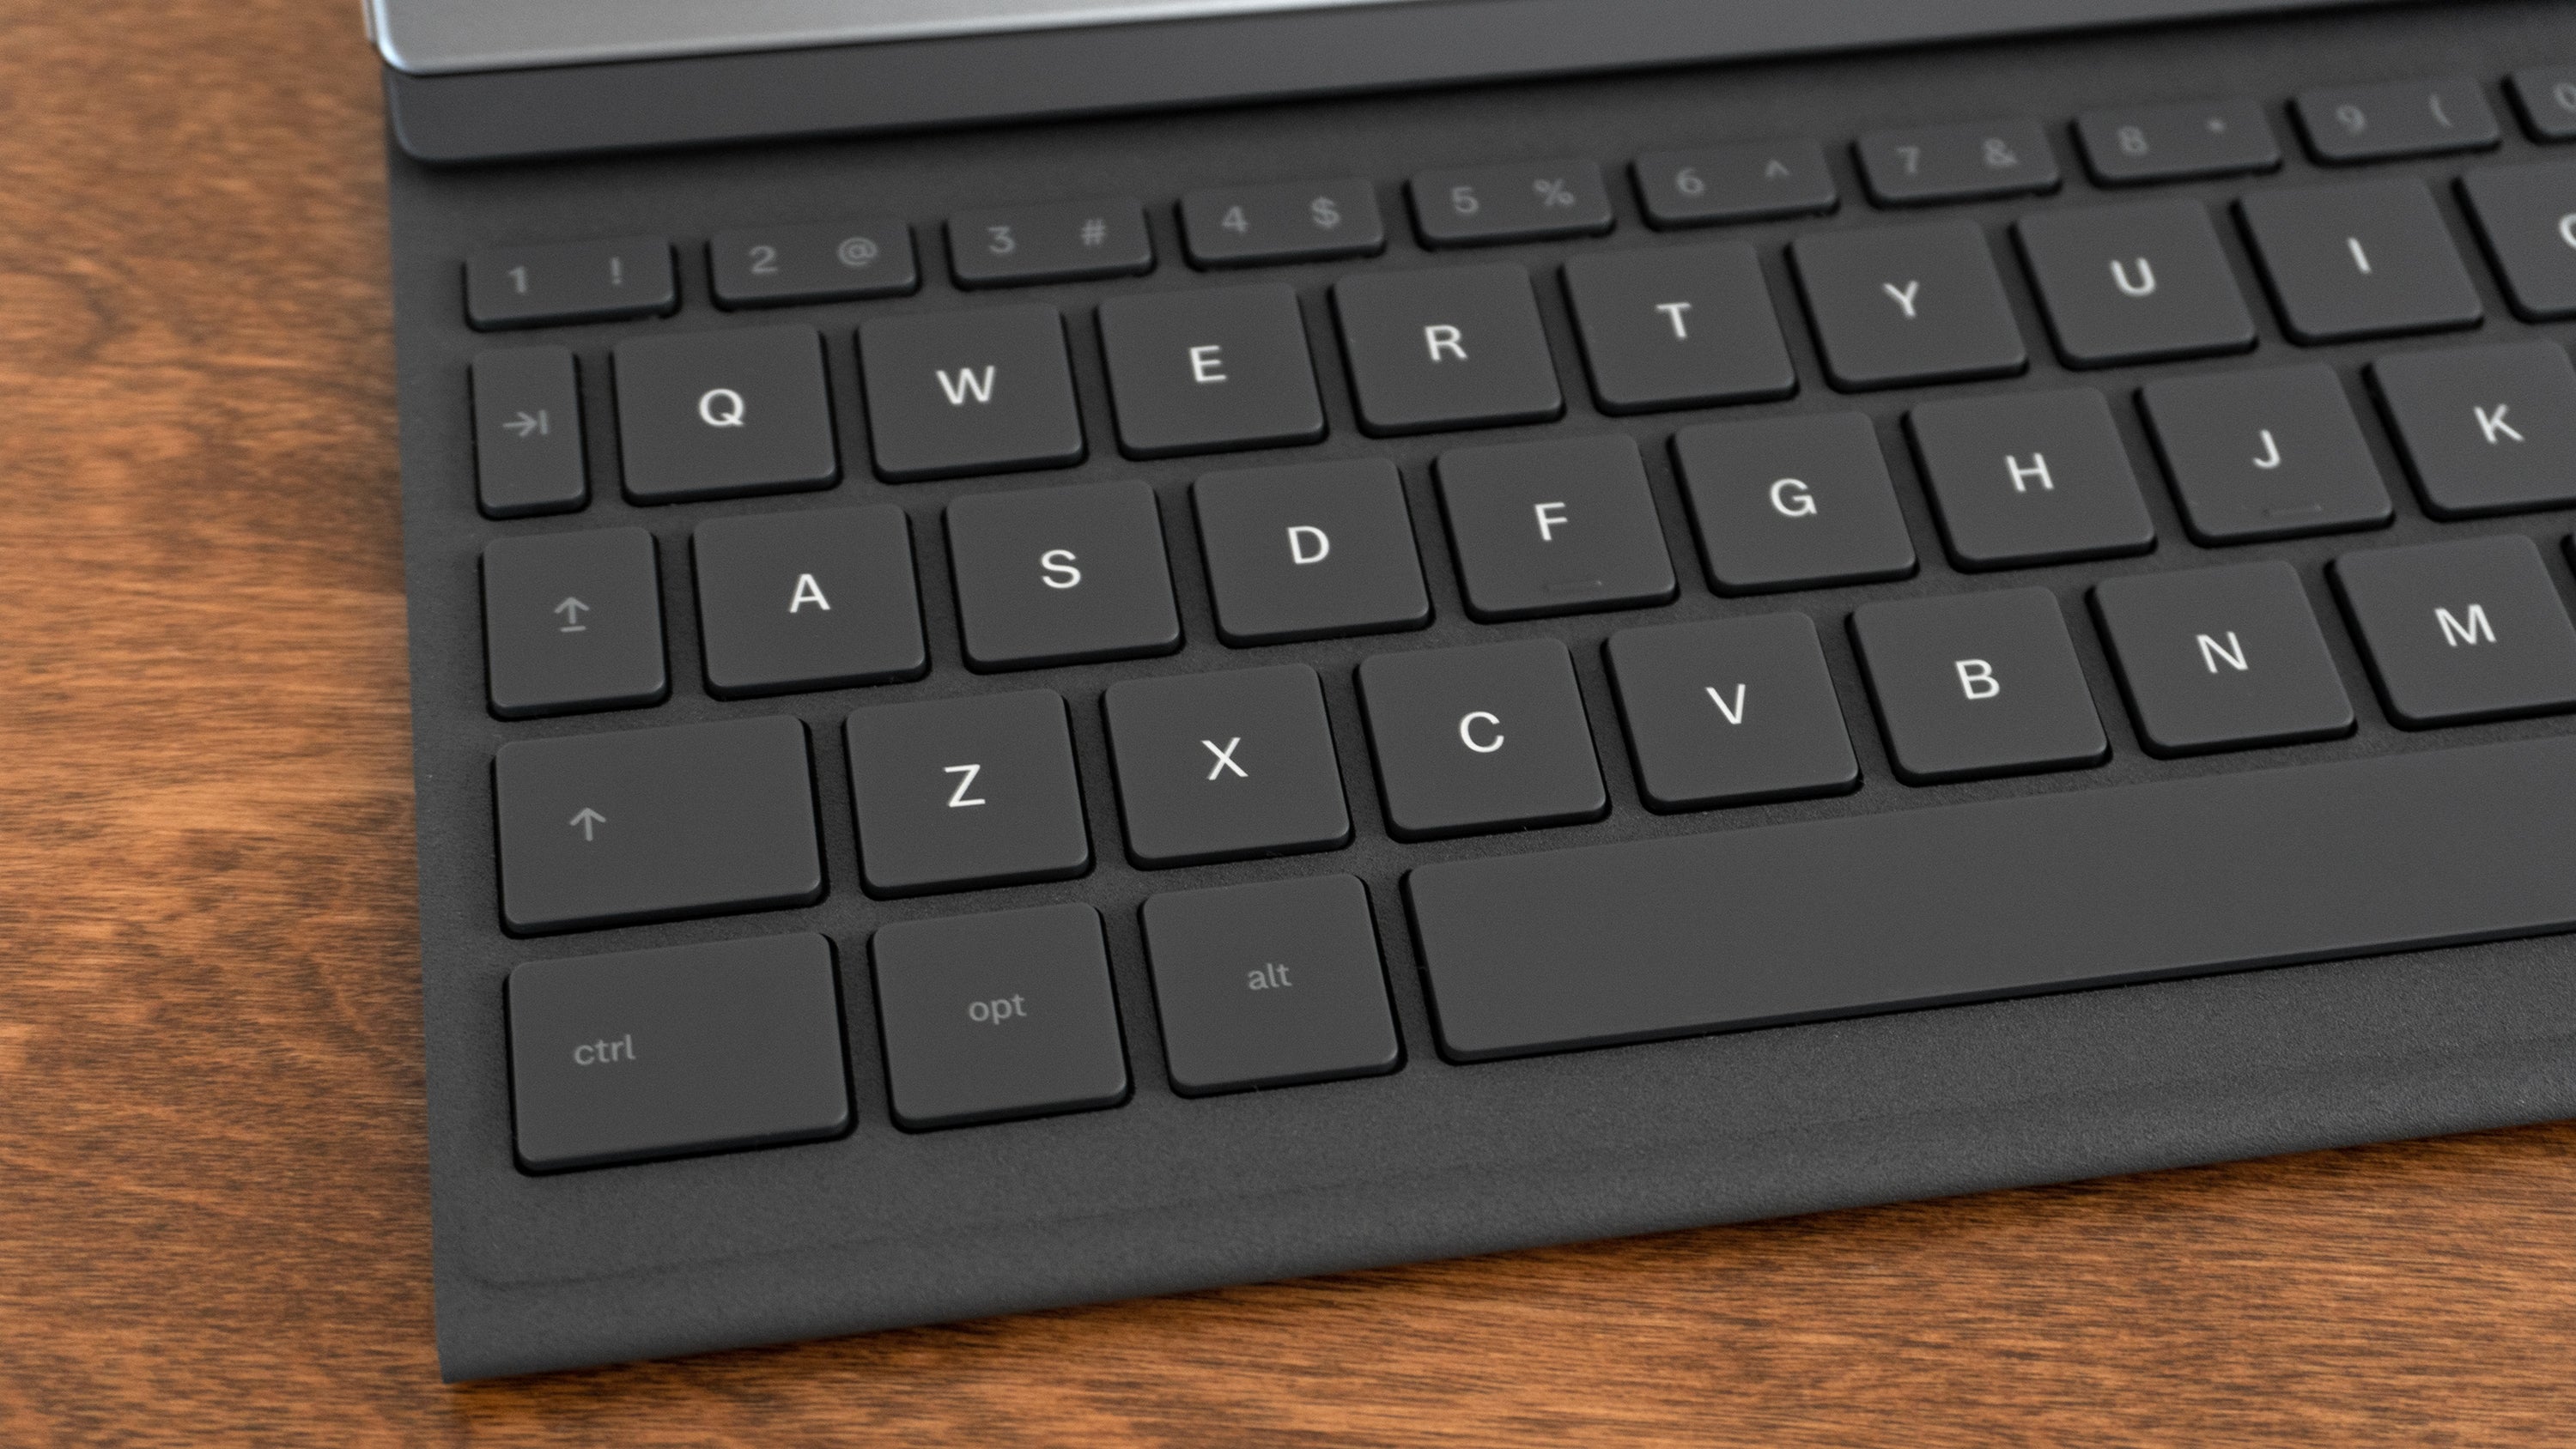 ReMarkable 2 adds keyboard case to level up its impressive no